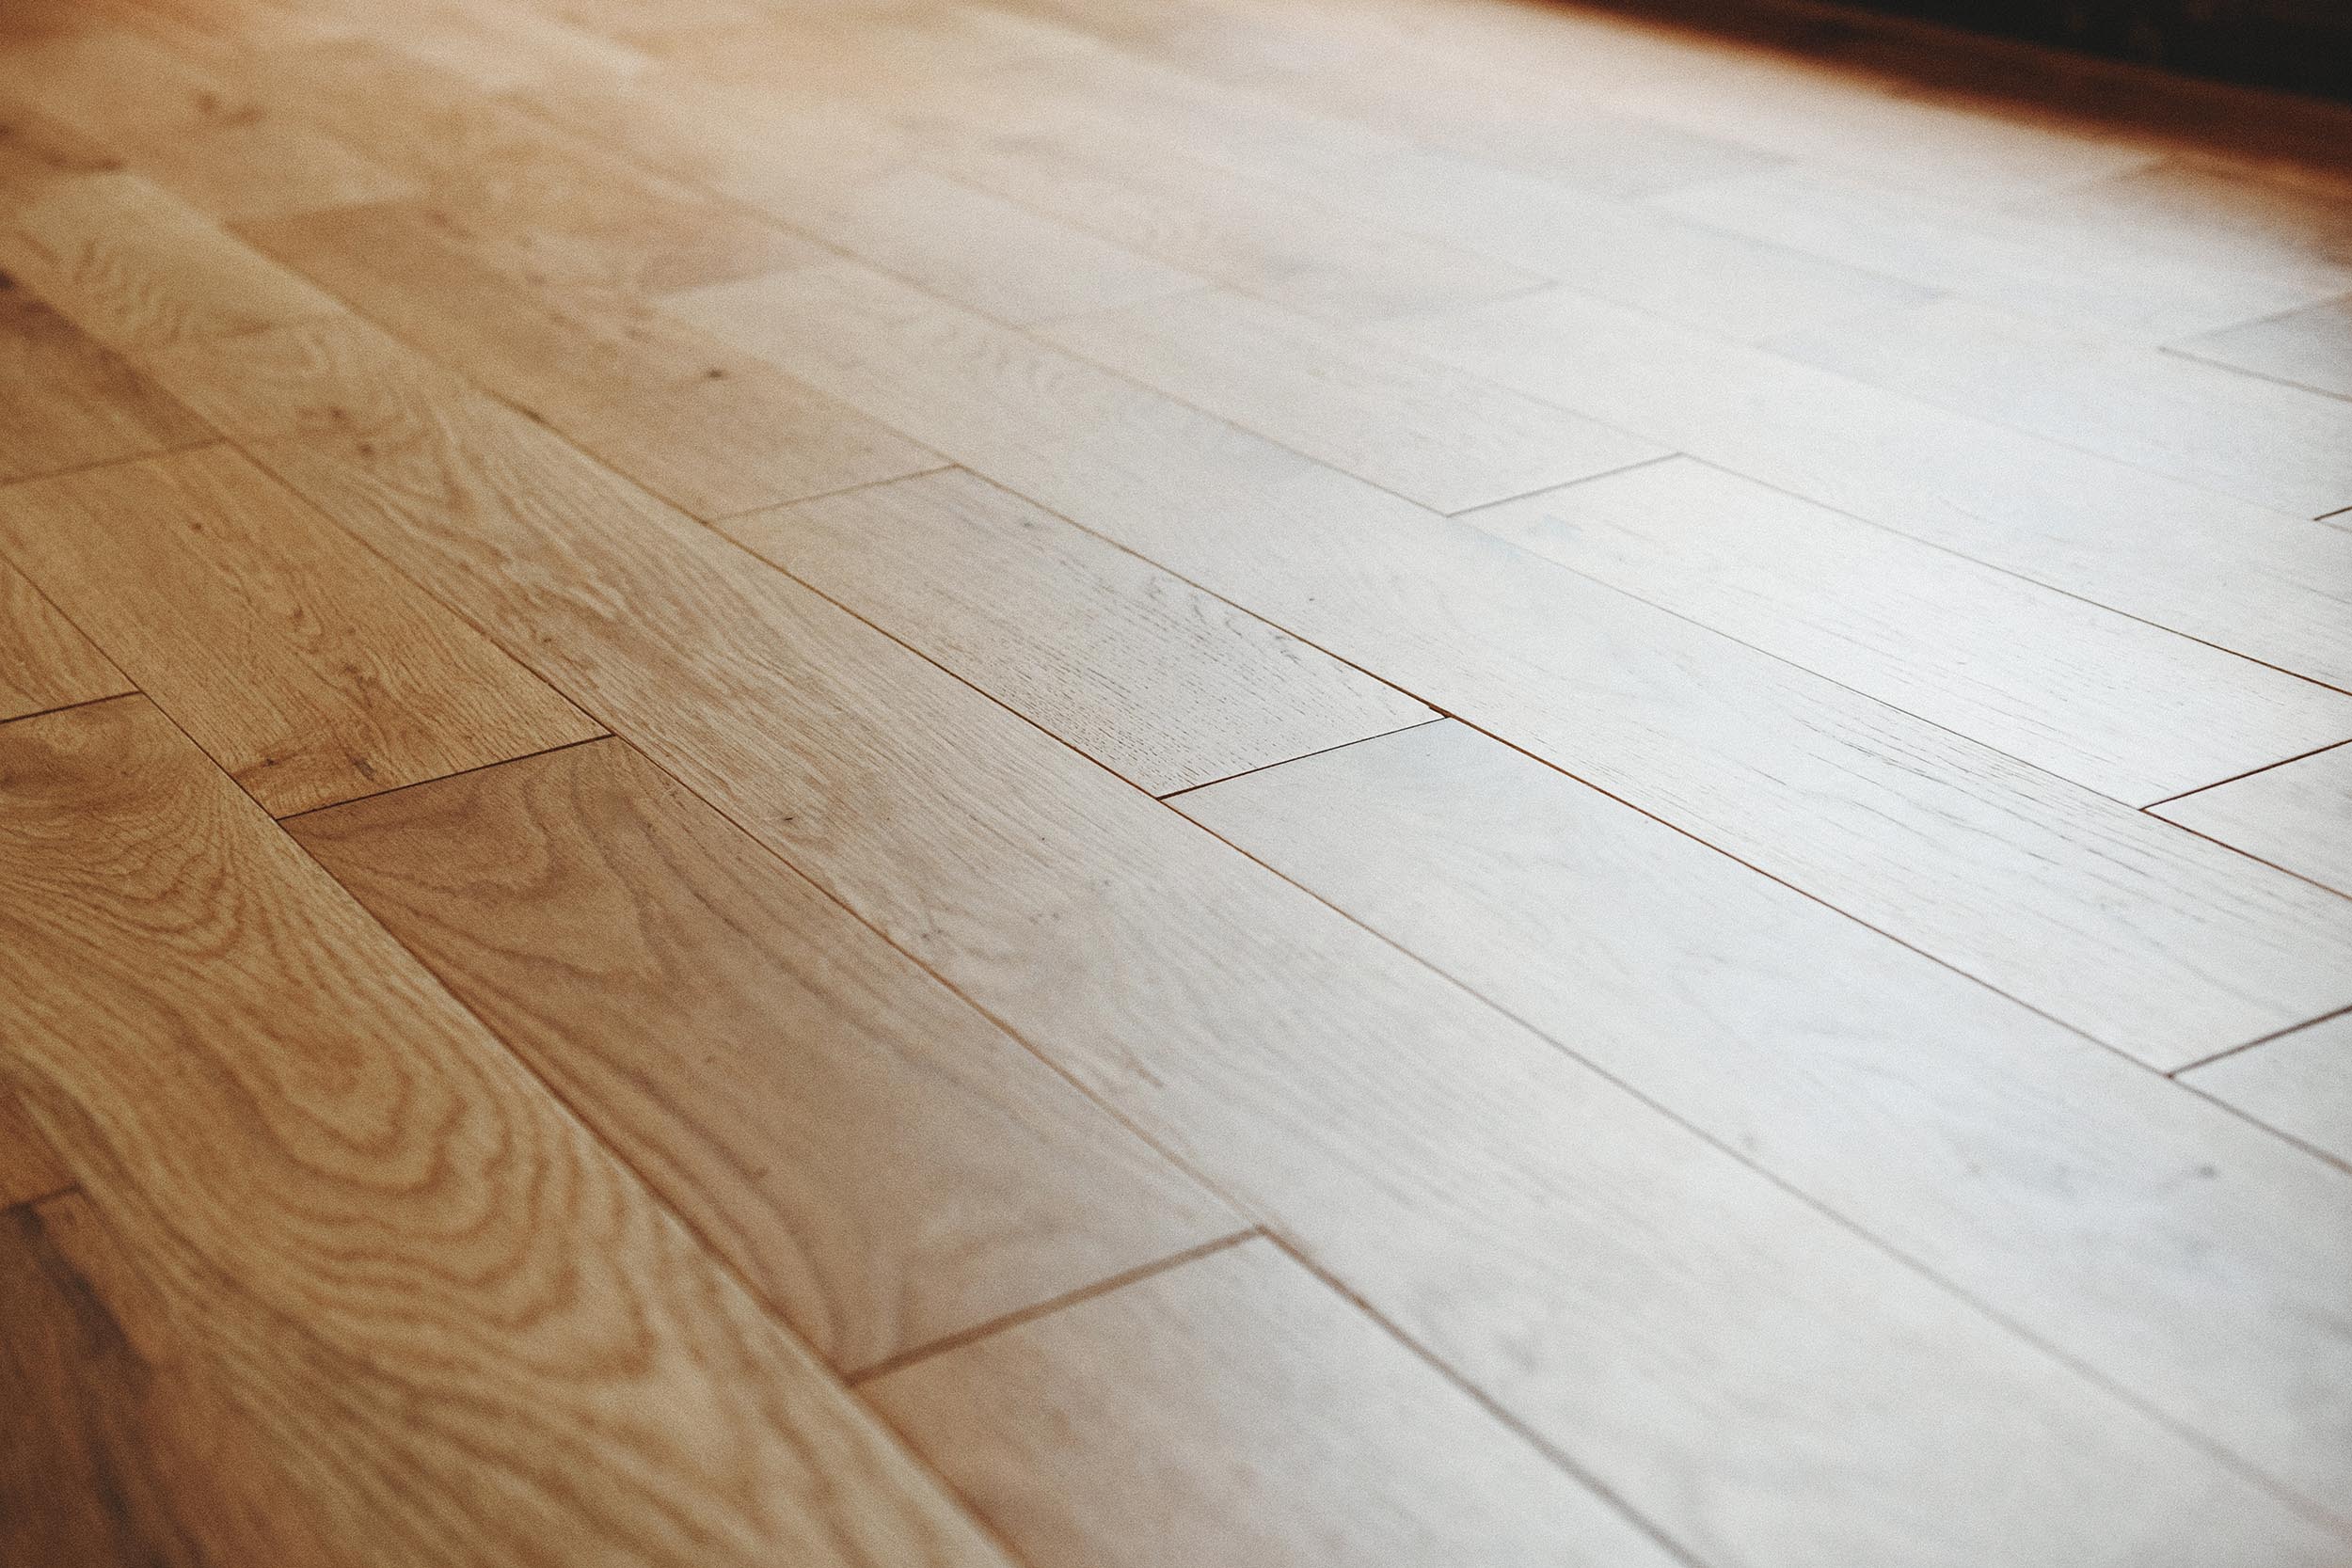 The bellawood white oak floors offer the perfect amount of variation // via Yellow Brick Home